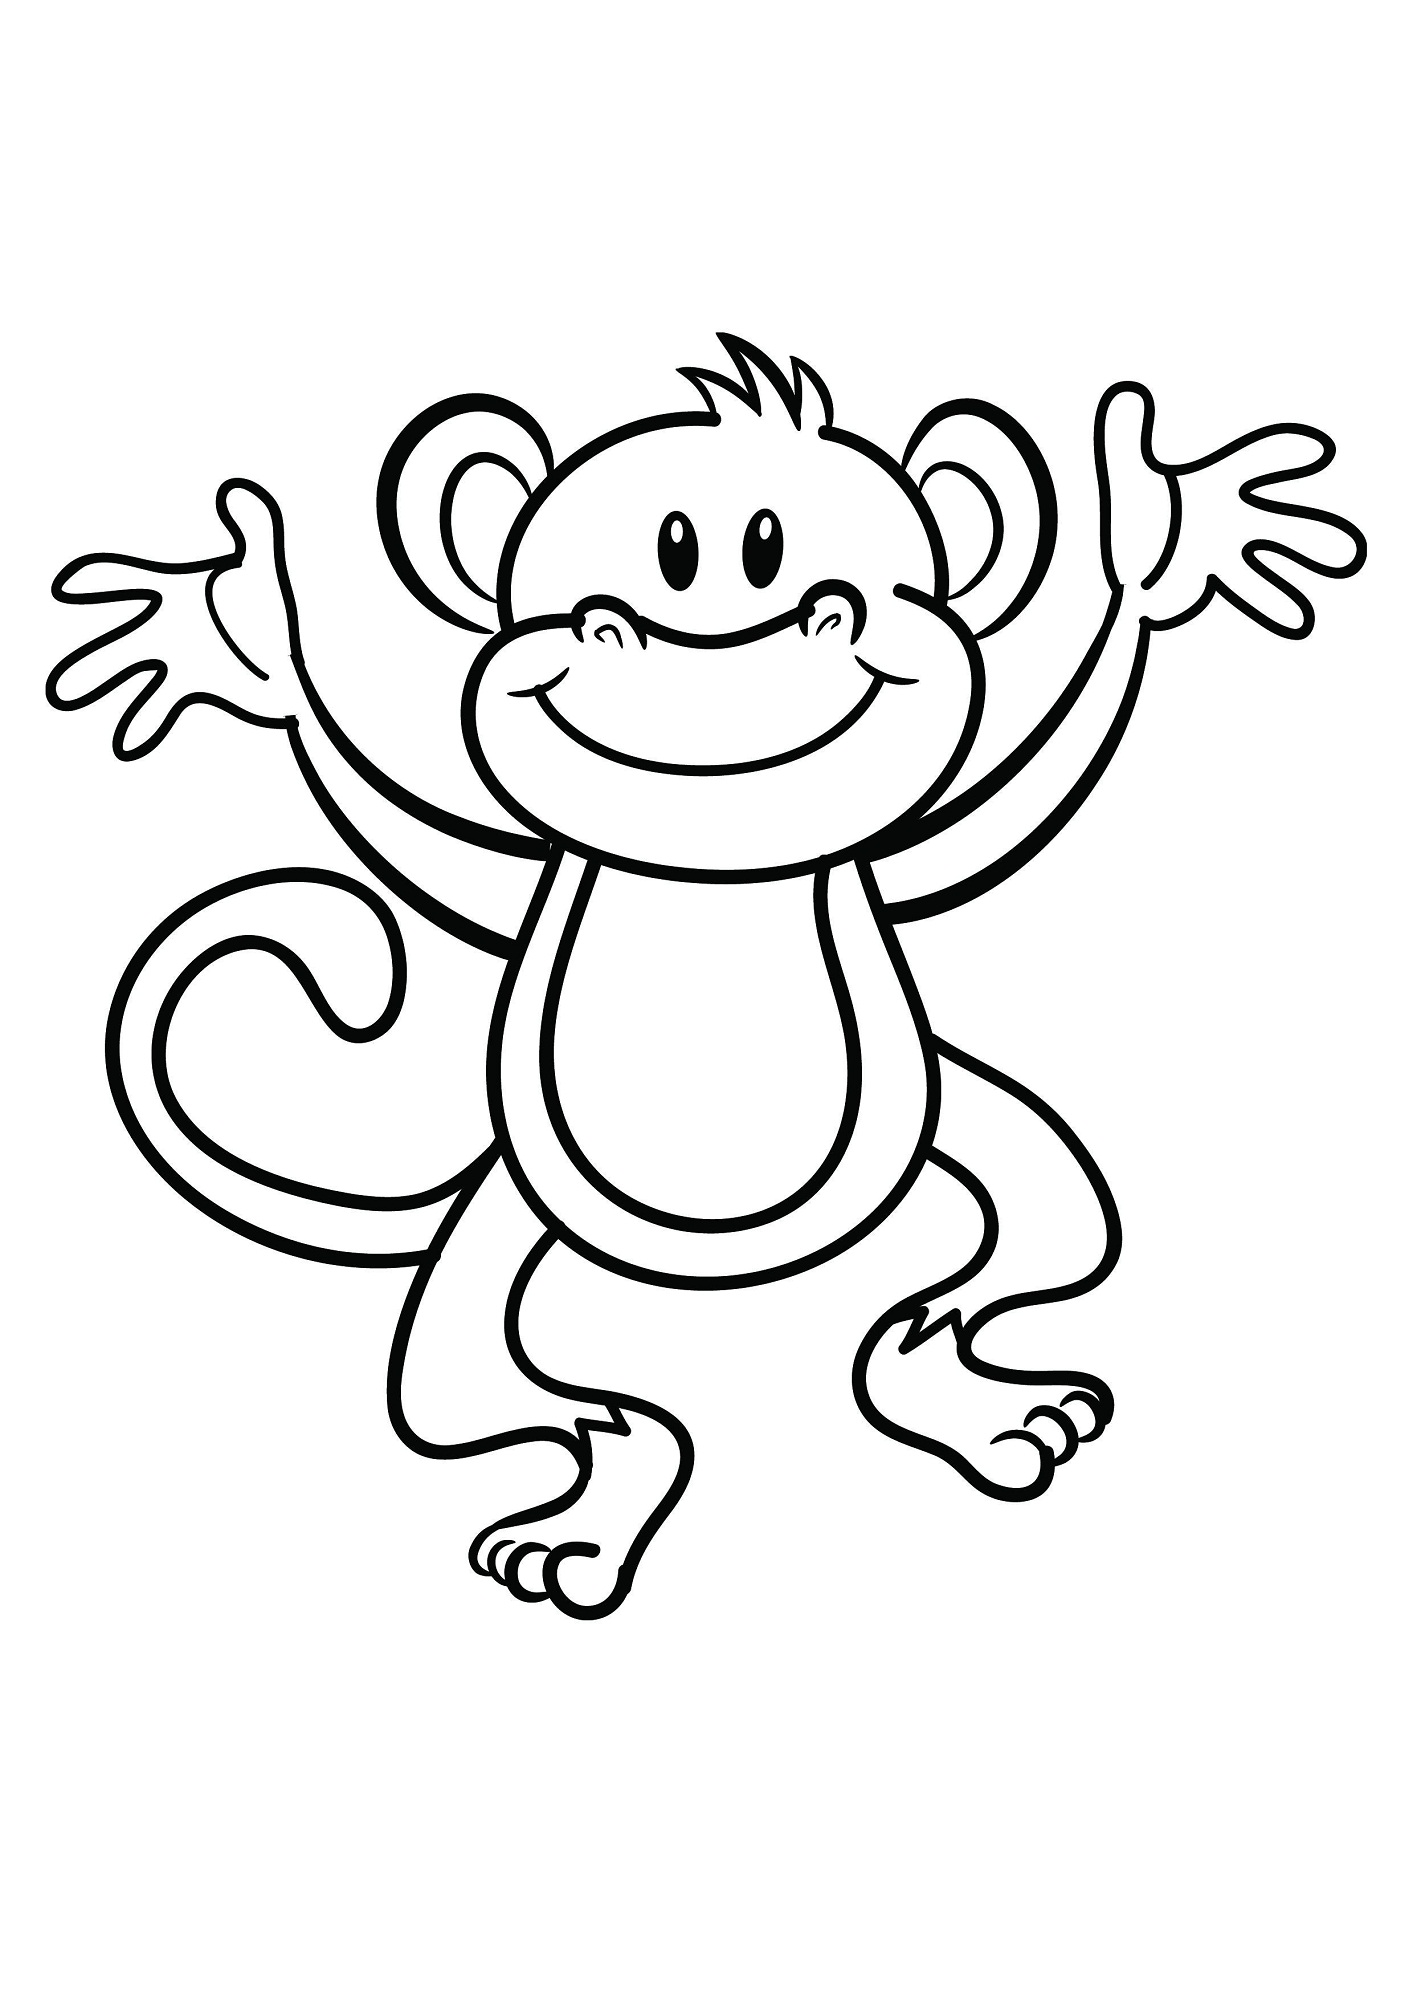 printable-picture-of-a-monkey-printable-word-searches